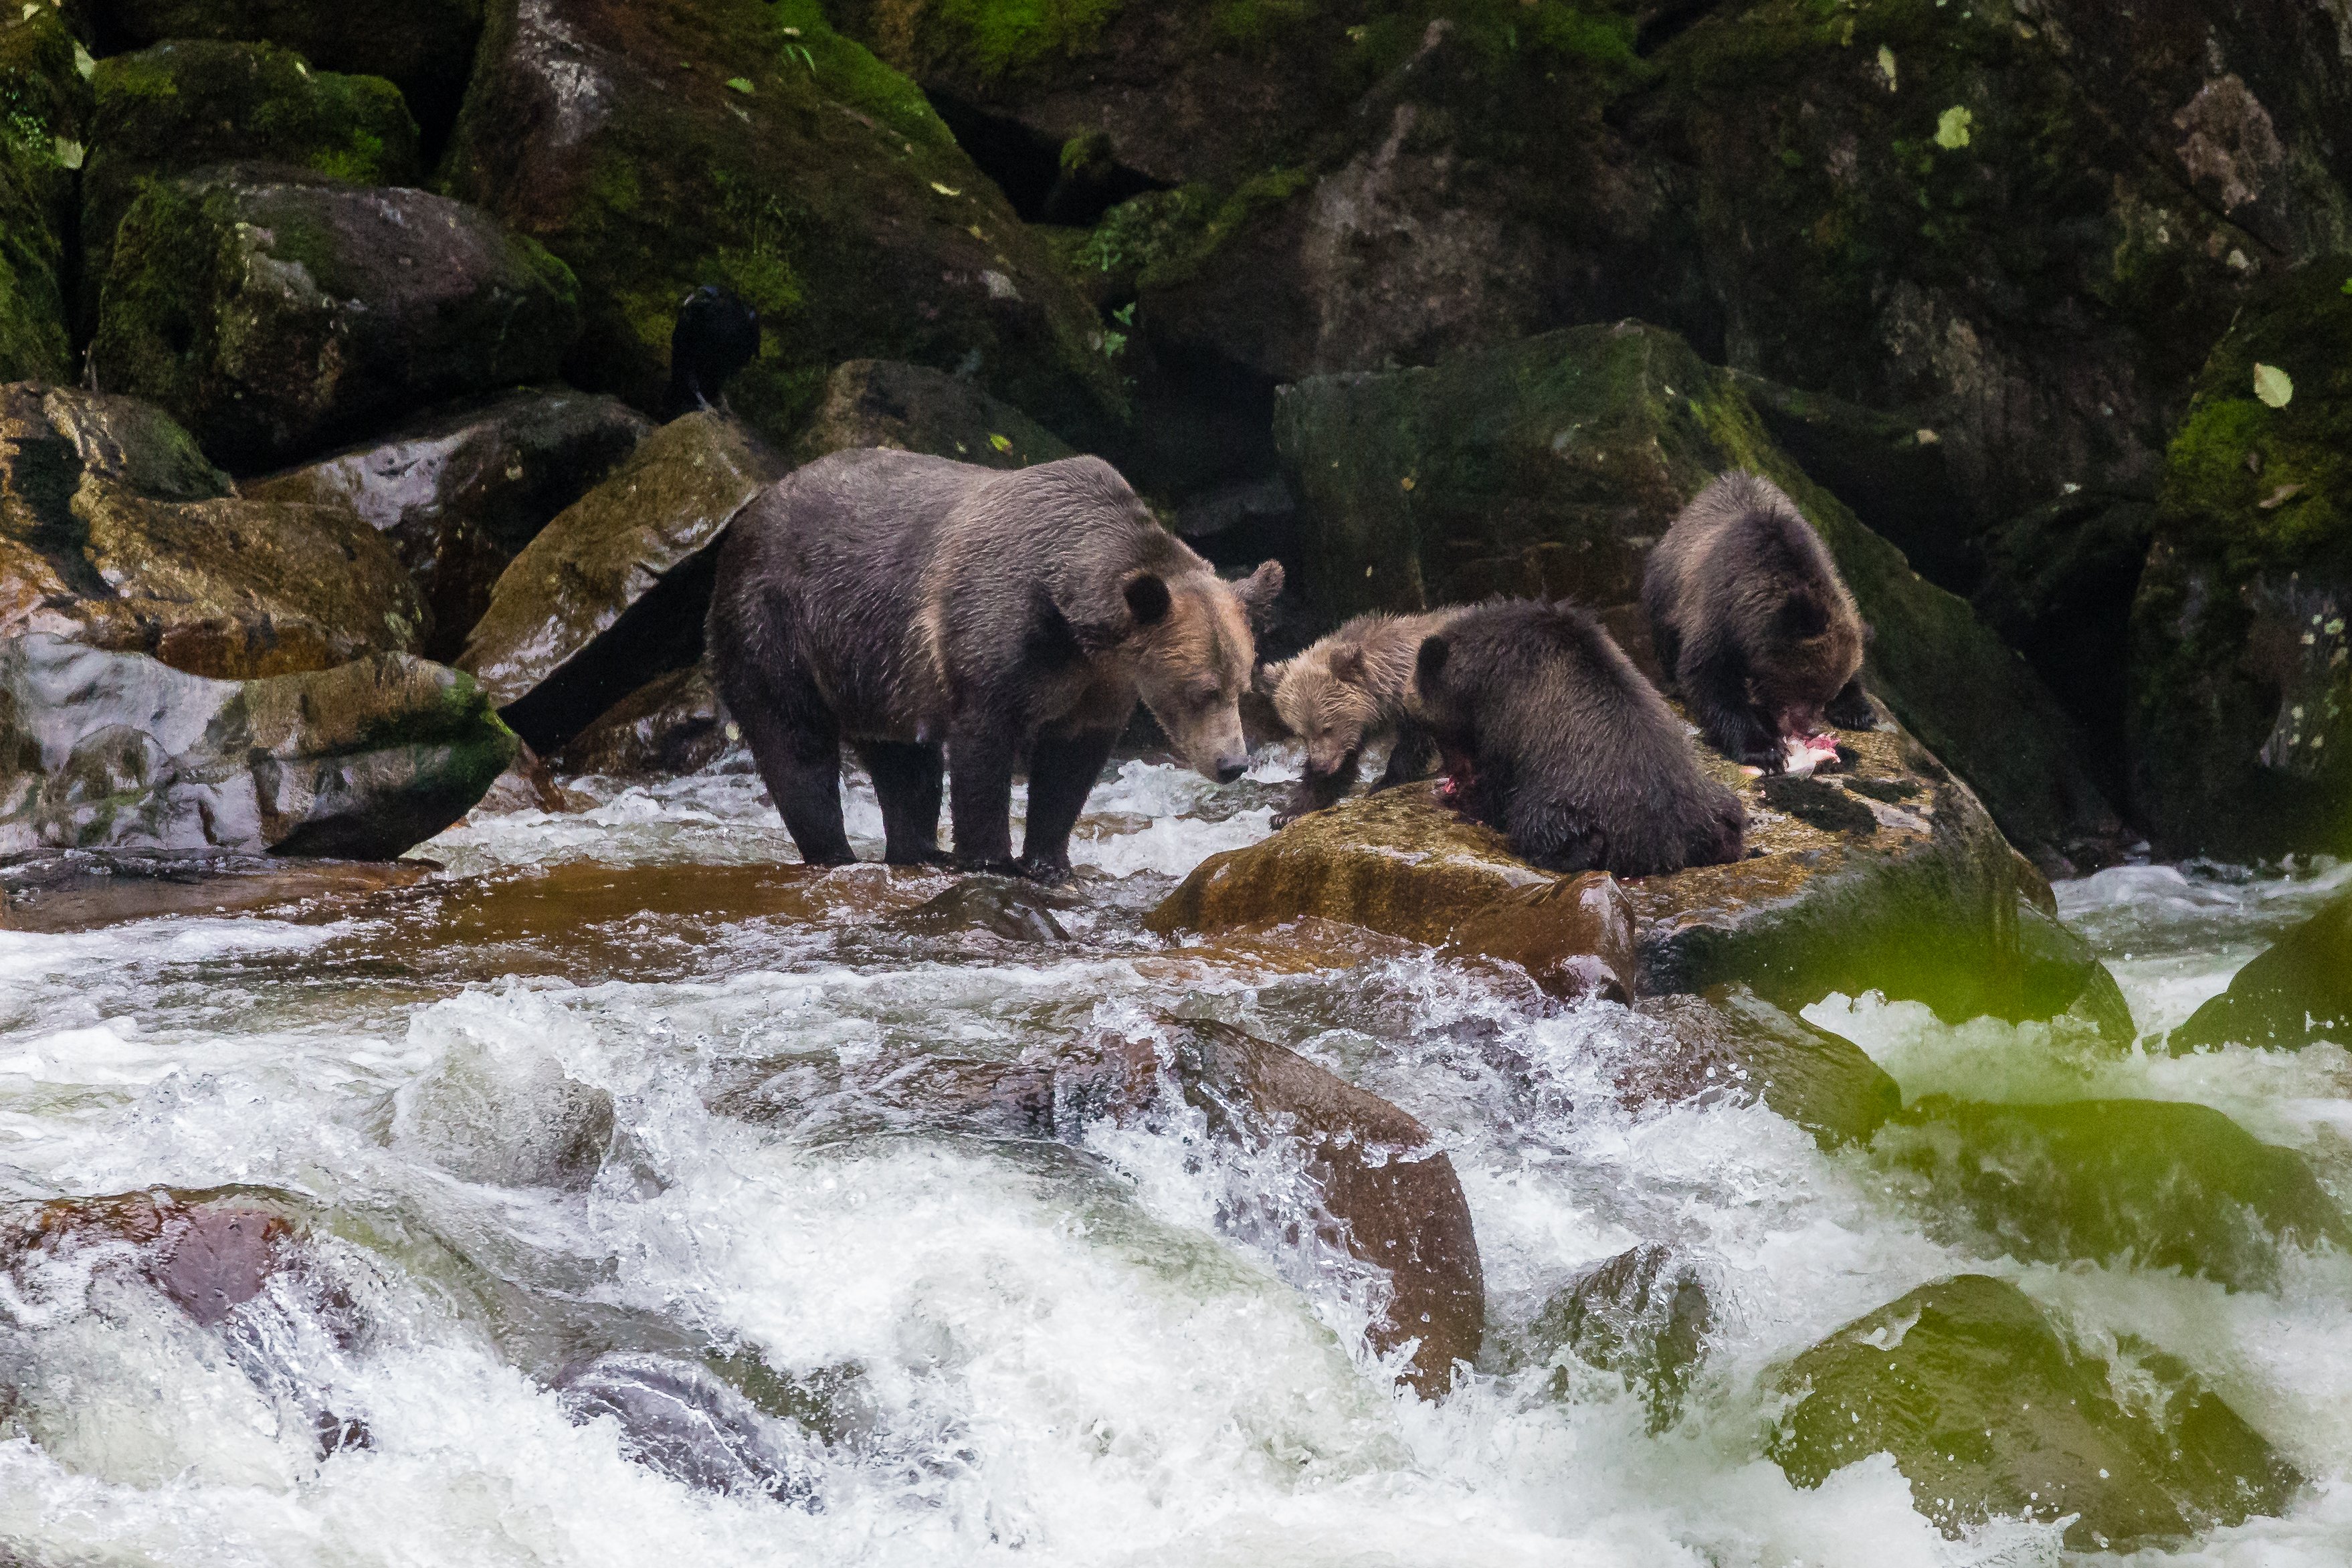 Grizzly bears in British Columbia